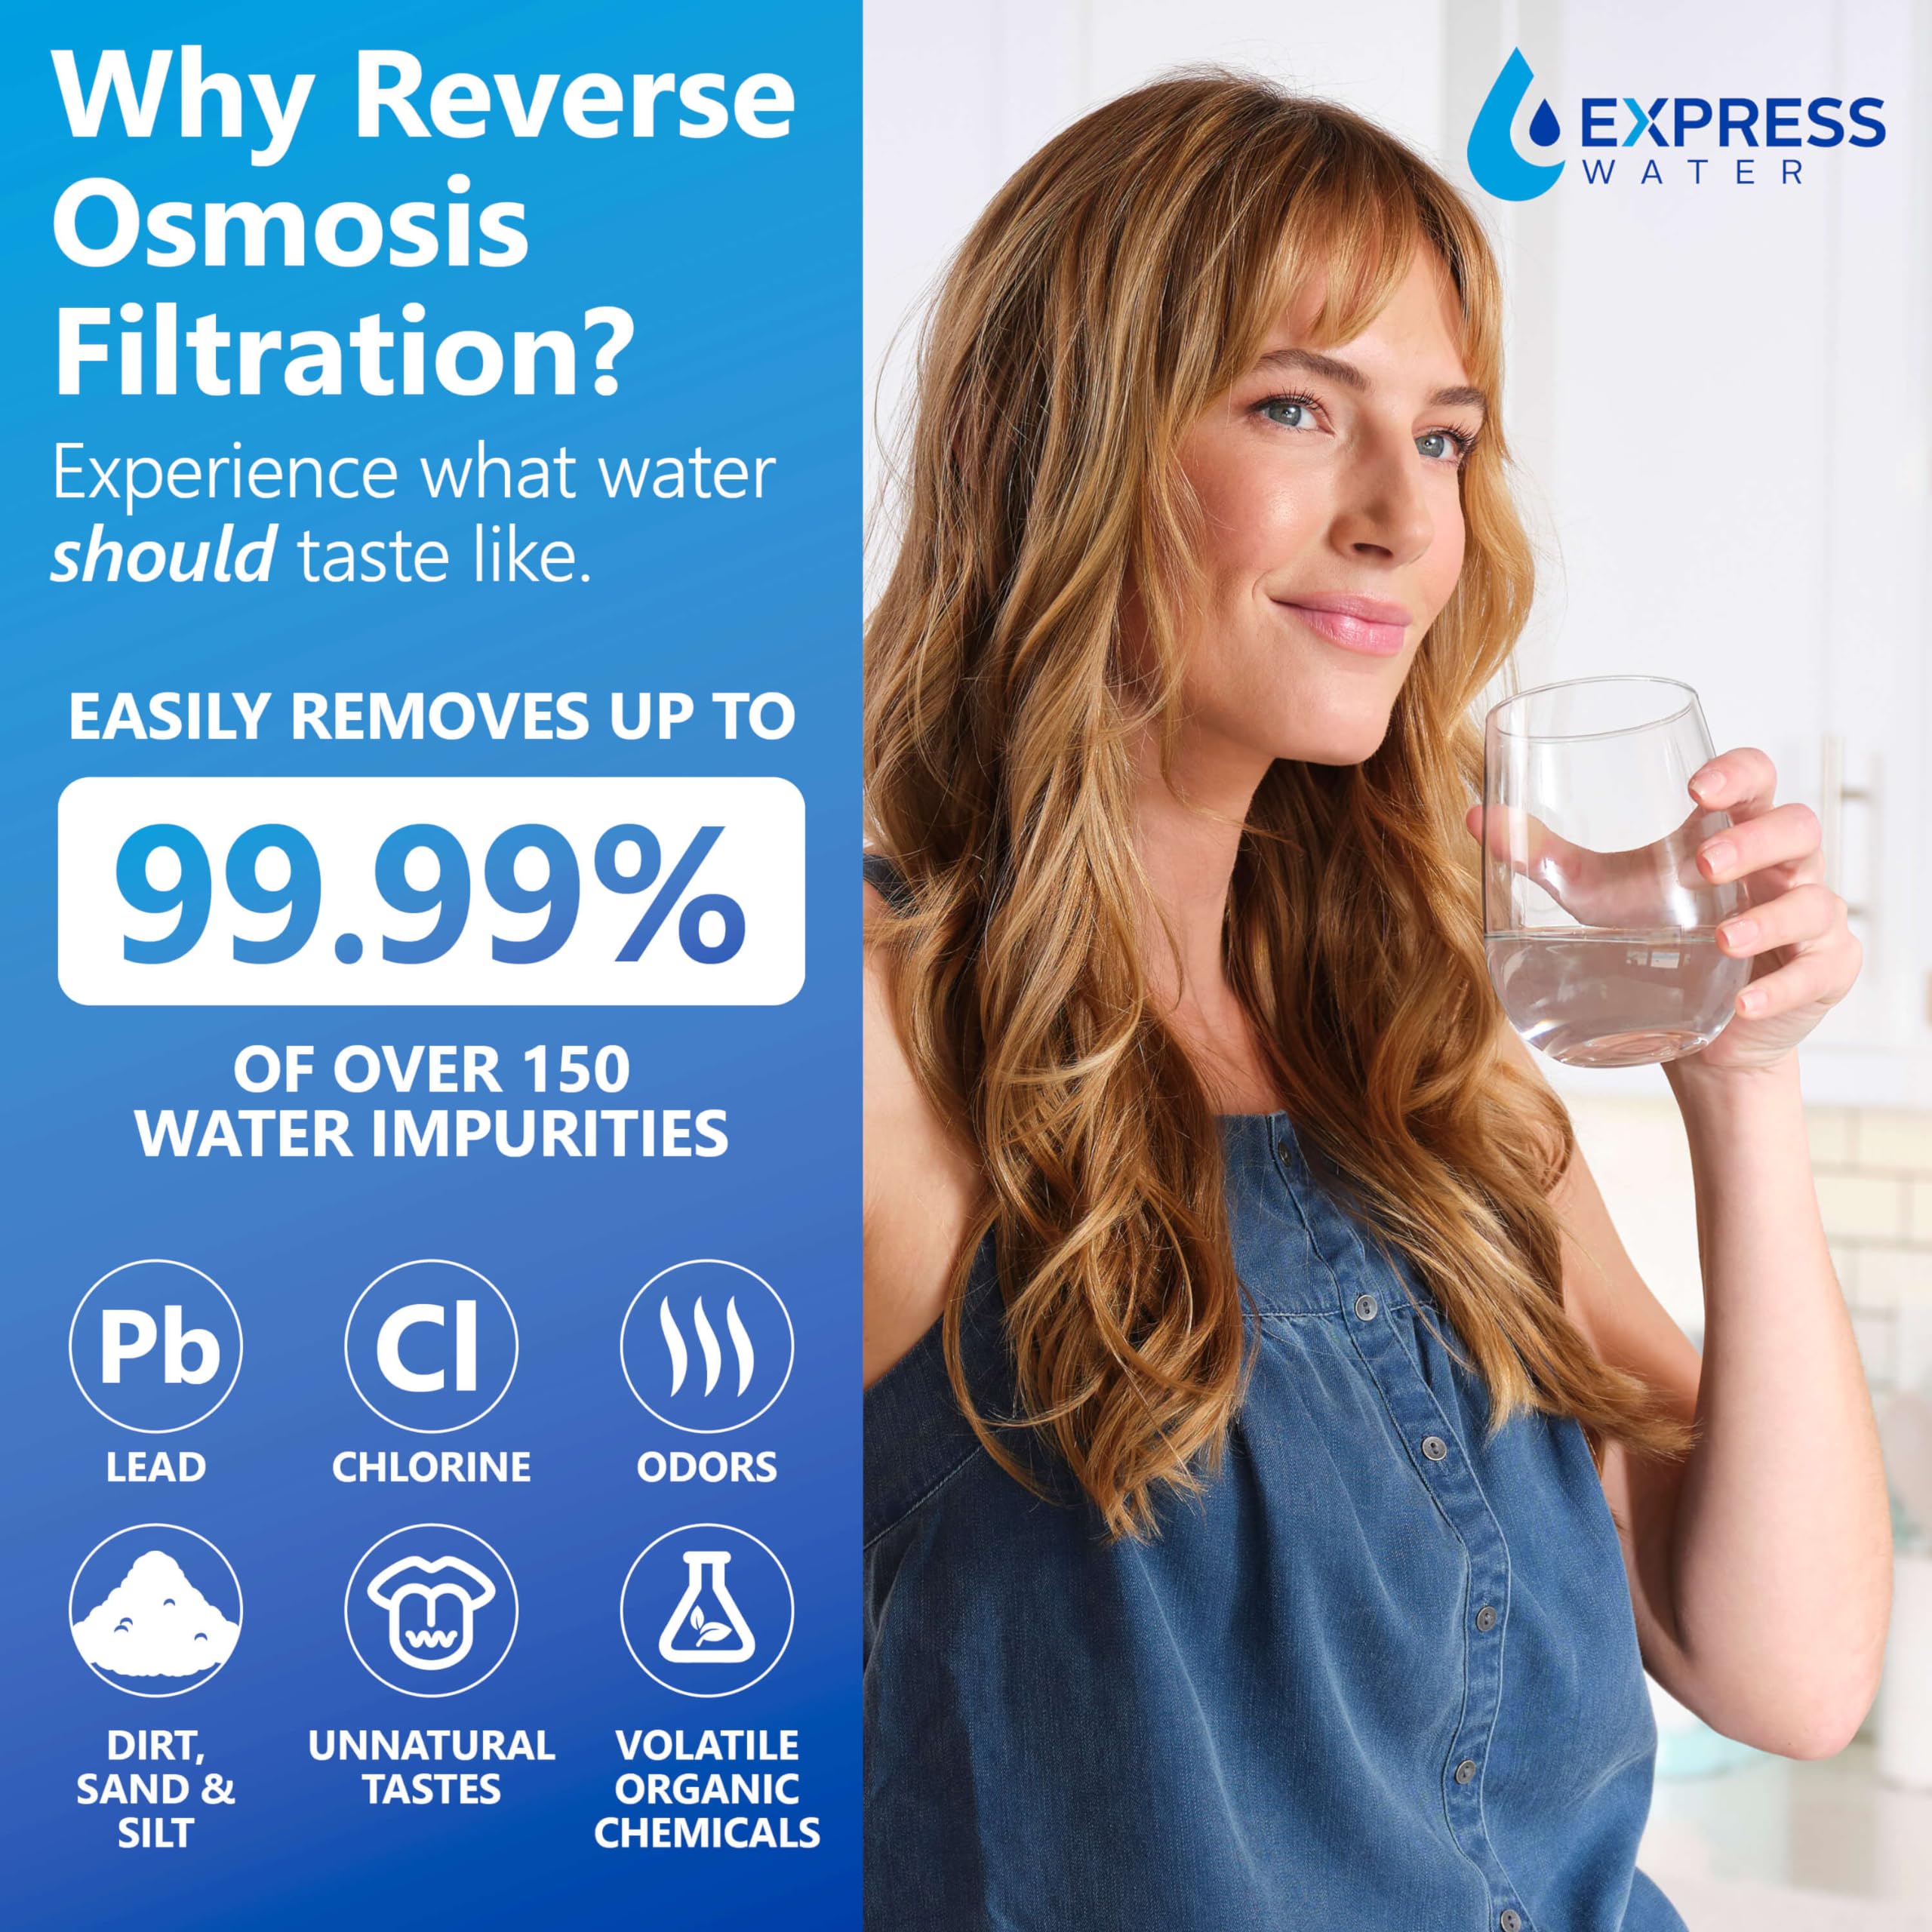 Express Water 600 GPD Tankless Reverse Osmosis System - 2:1 Pure to Drain Reverse Osmosis Water Filter System, Easy Install, Quick Twist Filters RO Water System - RO System Under Sink, Brushed Nickel